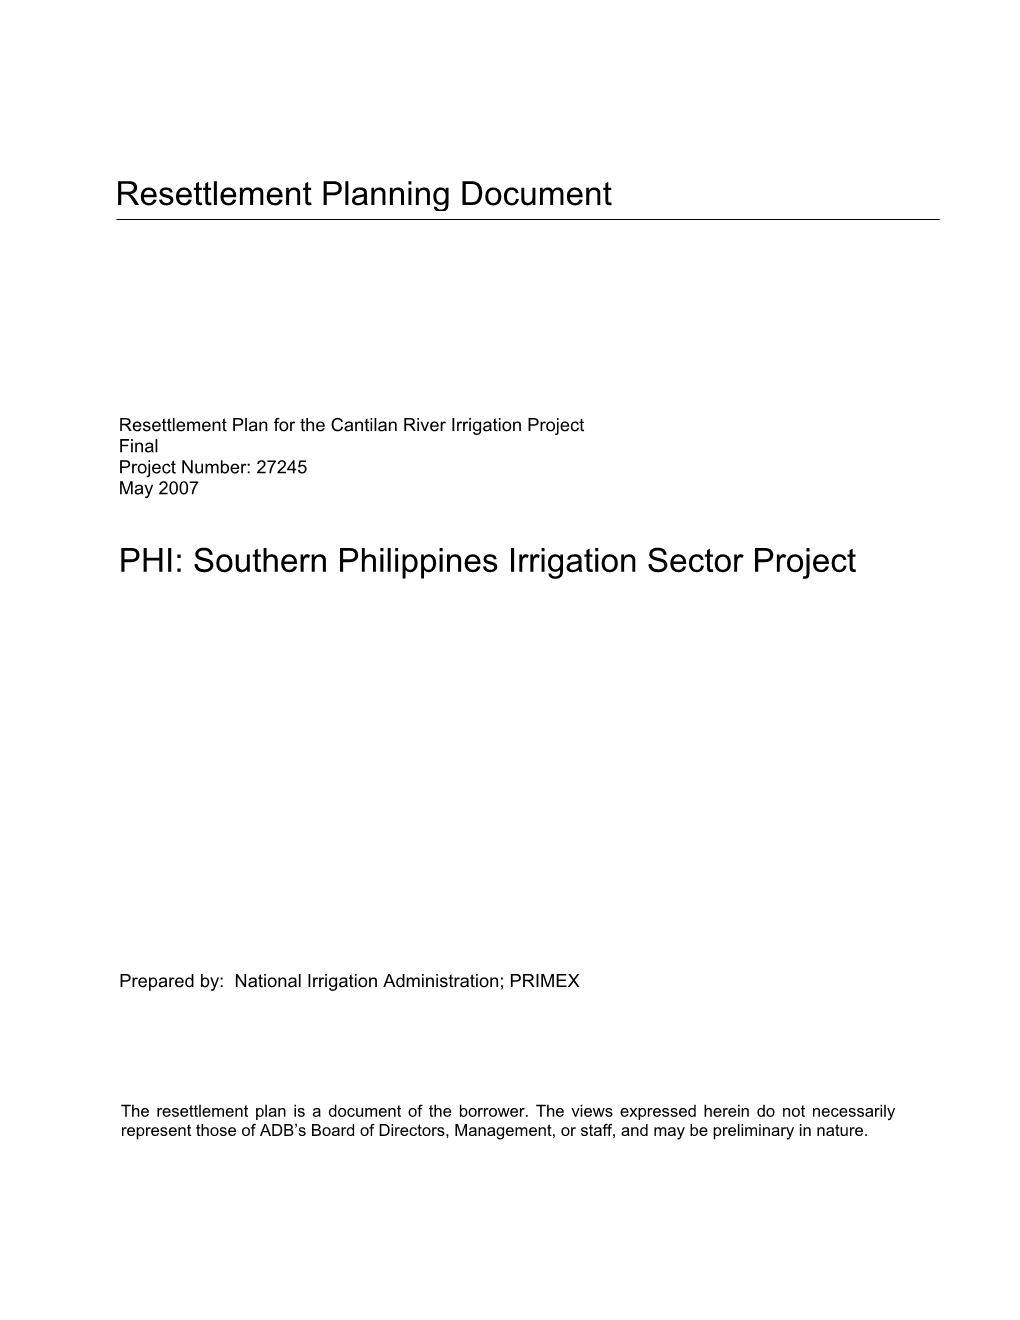 Southern Philippines Irrigation Sector Project